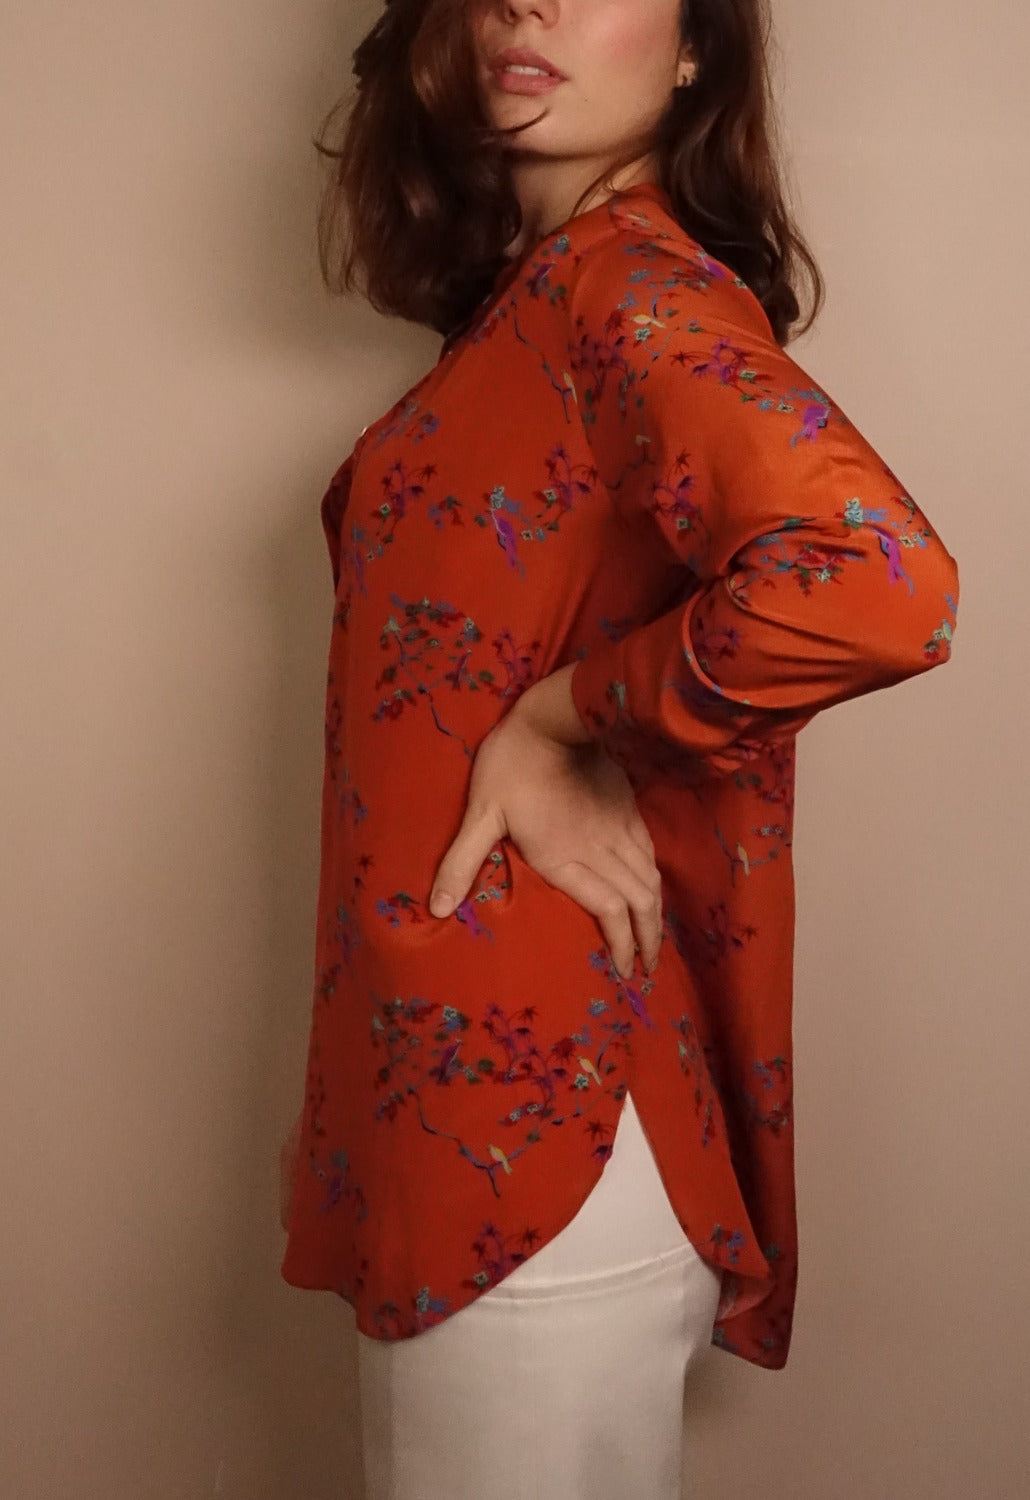 "Unique" silk shirt with "Cineserie" pattern with orange background